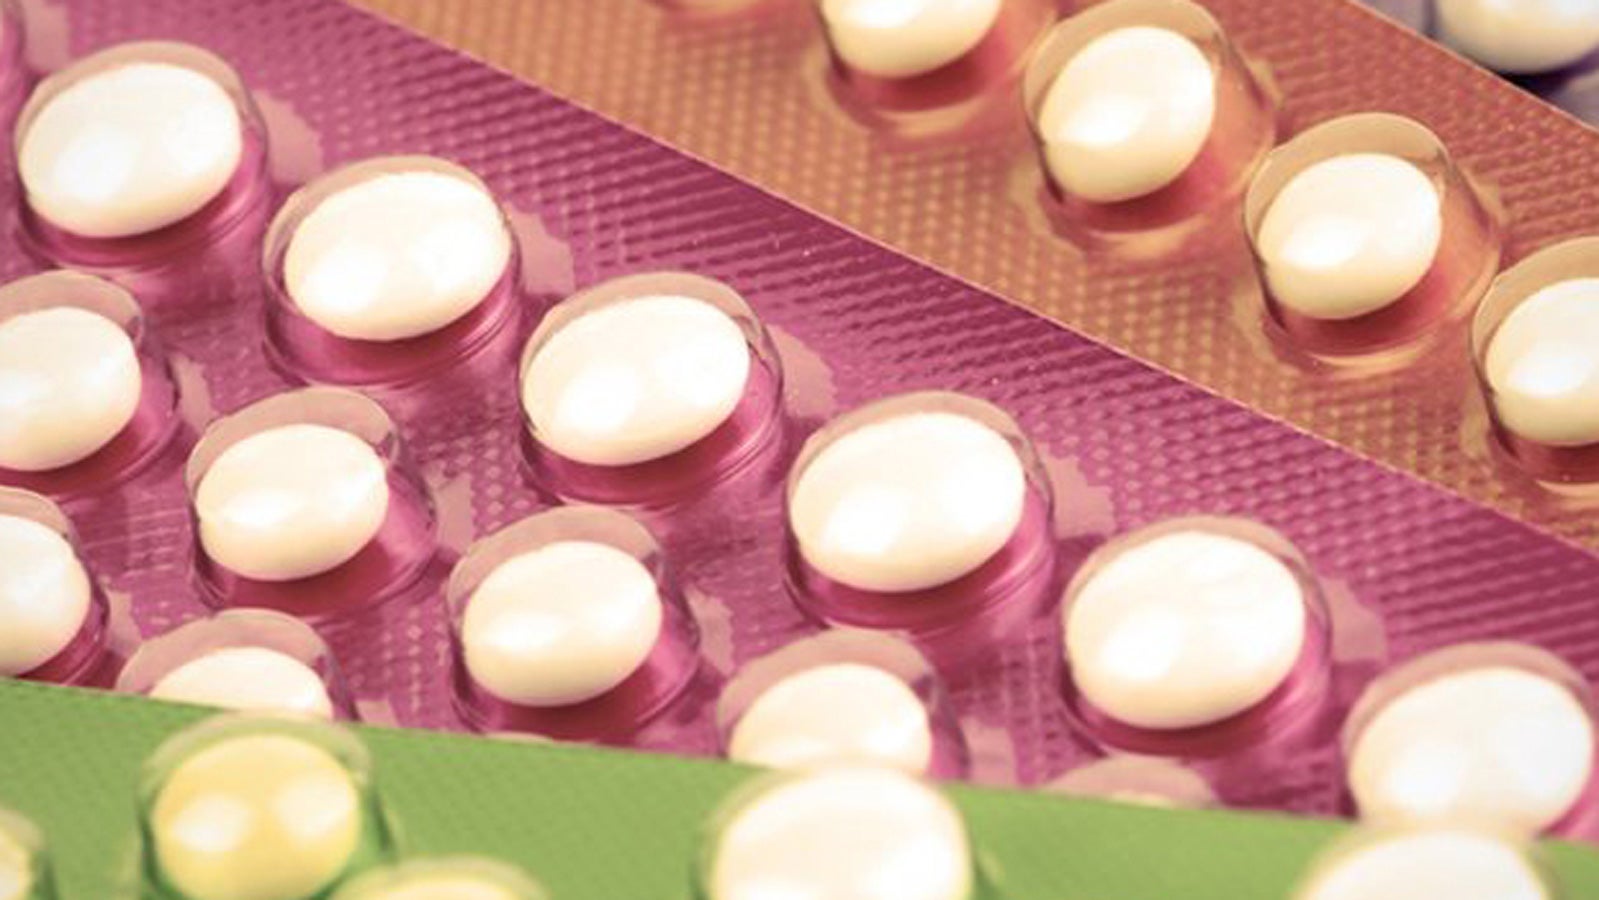 Close-up image of contraceptive pill packets